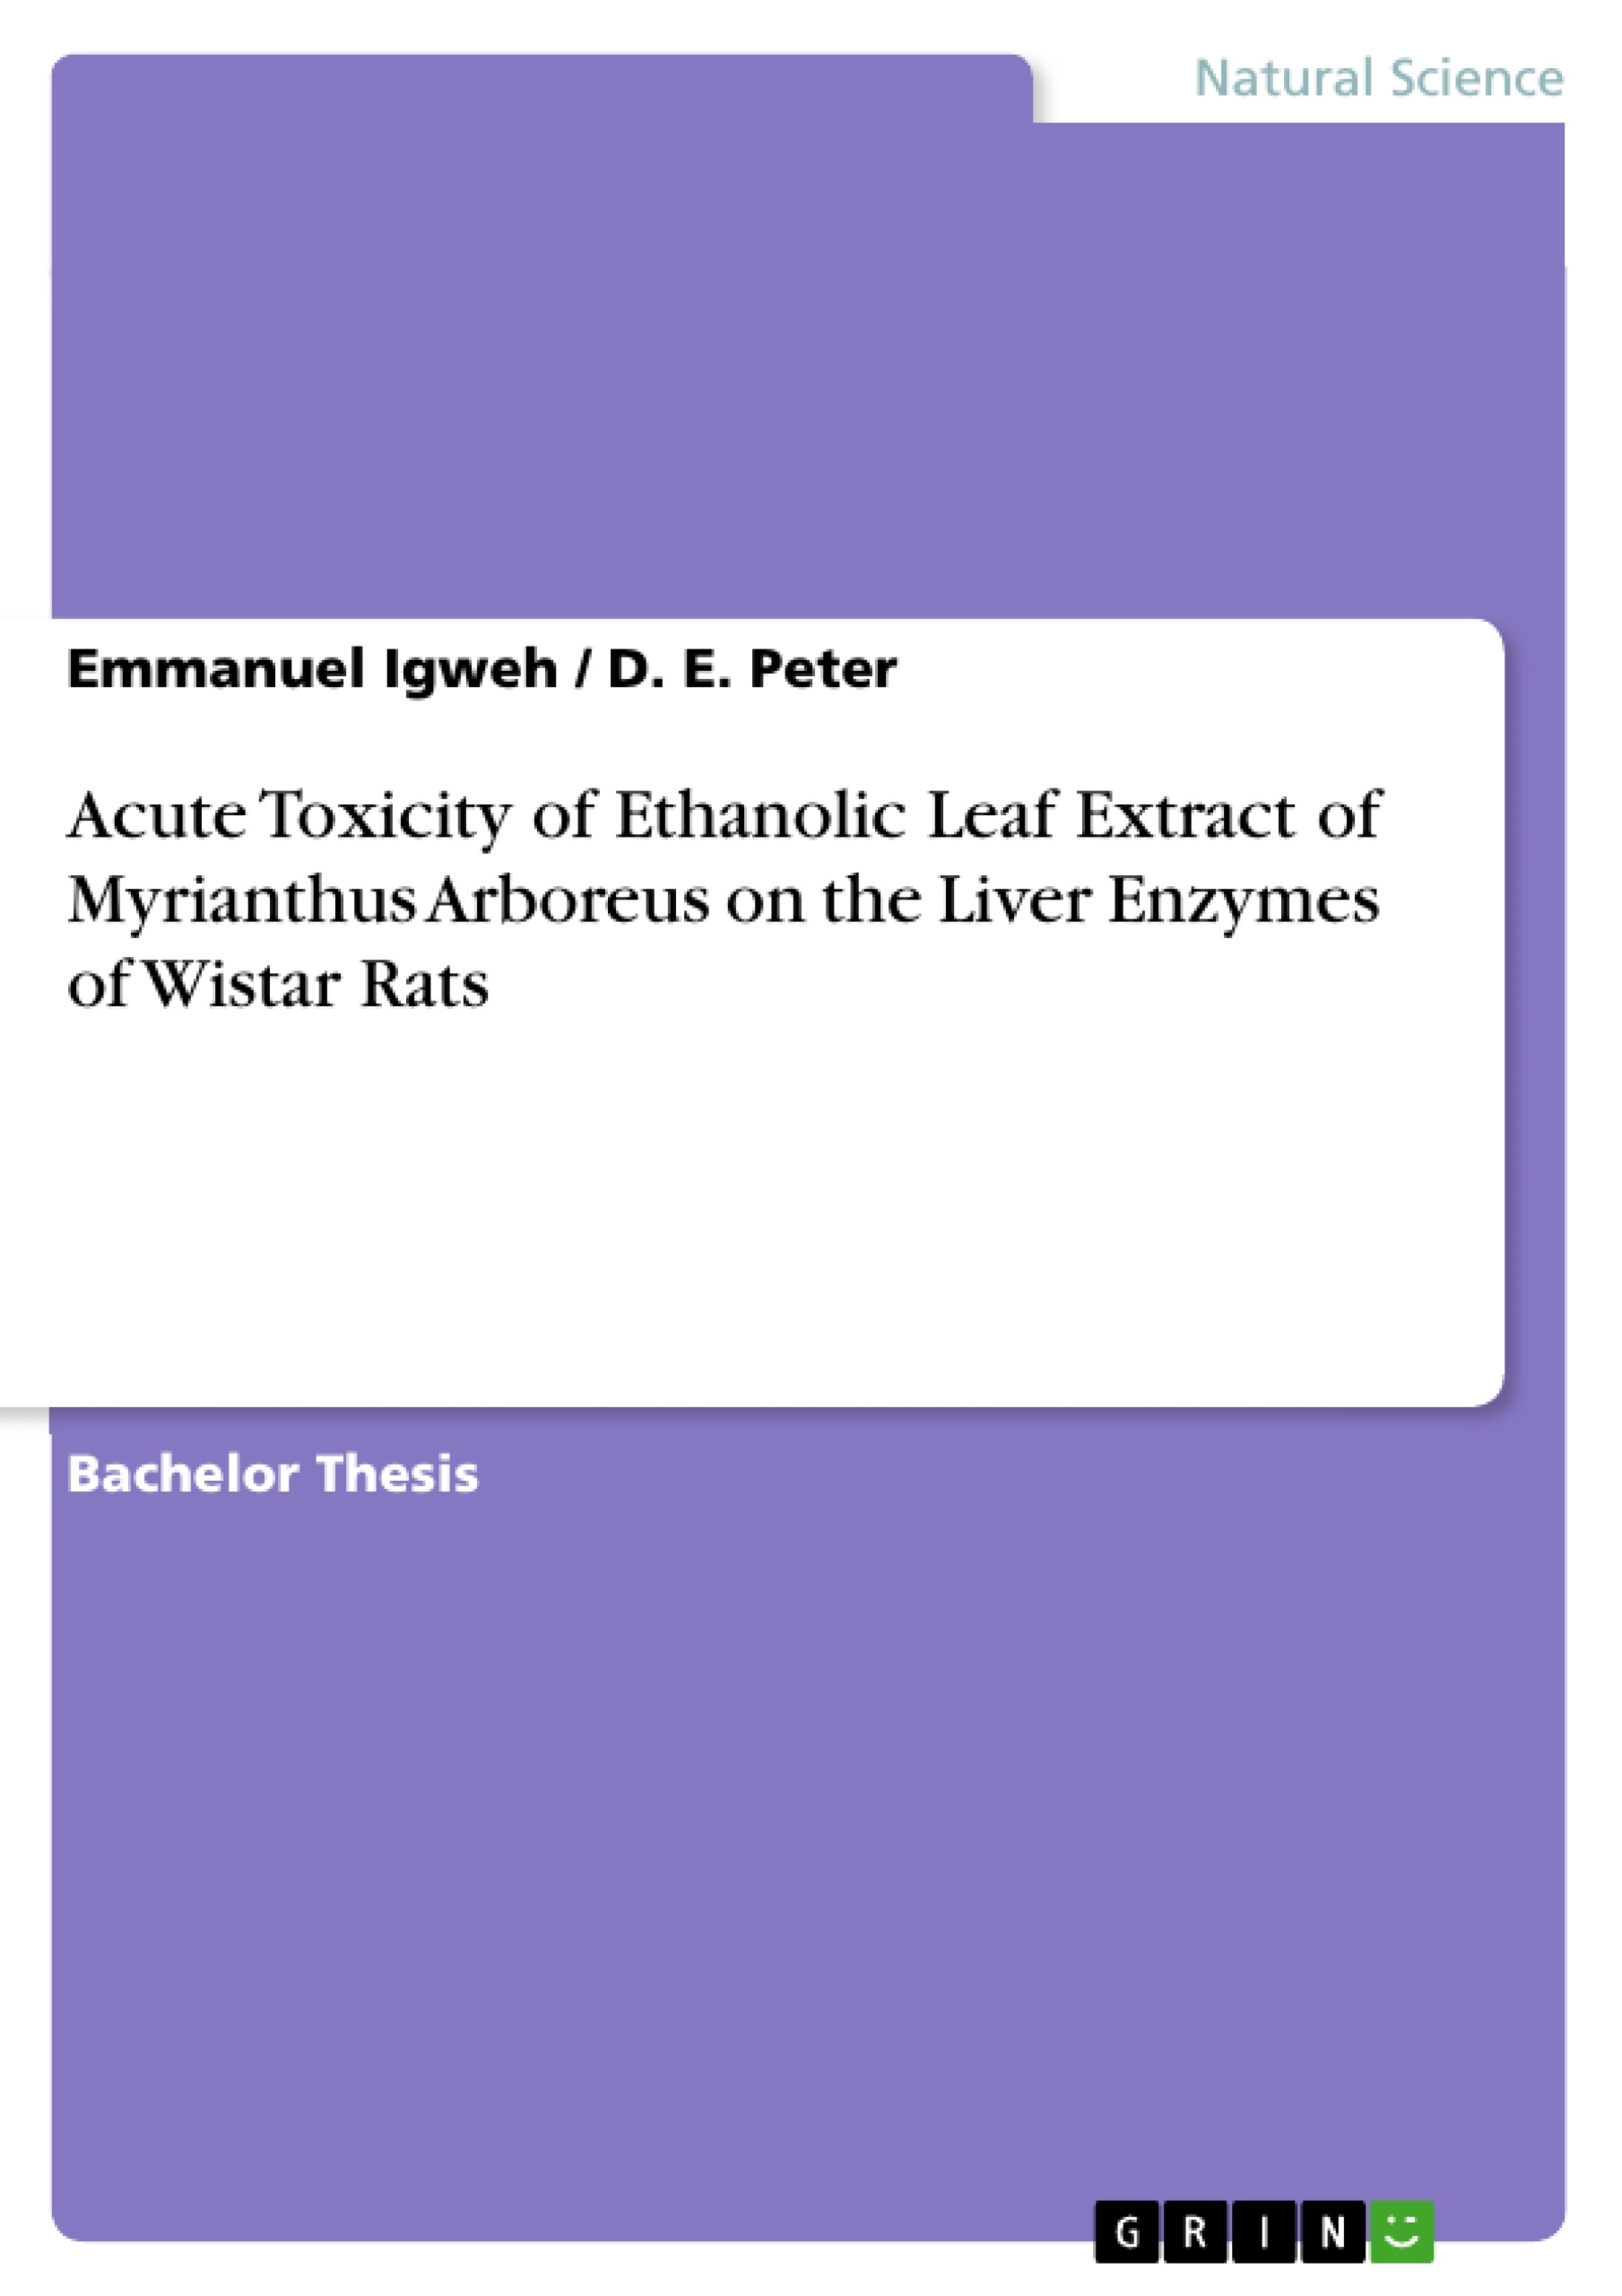 Title: Acute Toxicity of Ethanolic Leaf Extract of Myrianthus Arboreus on the Liver Enzymes of Wistar Rats